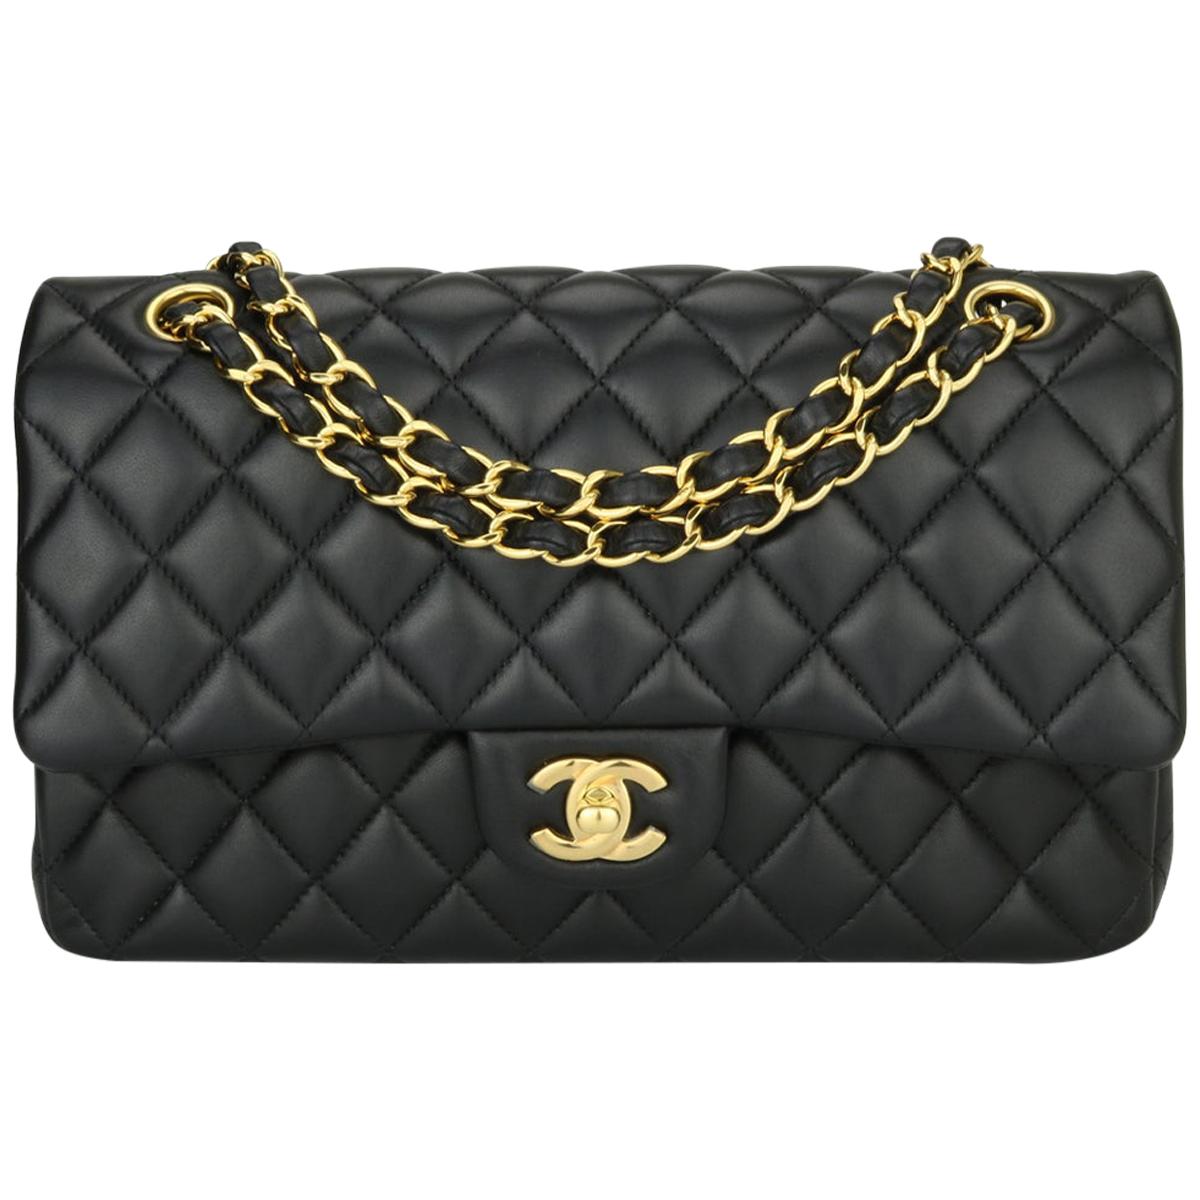 CHANEL Classic Double Flap Bag Medium Black Lambskin with Gold Hardware 2016